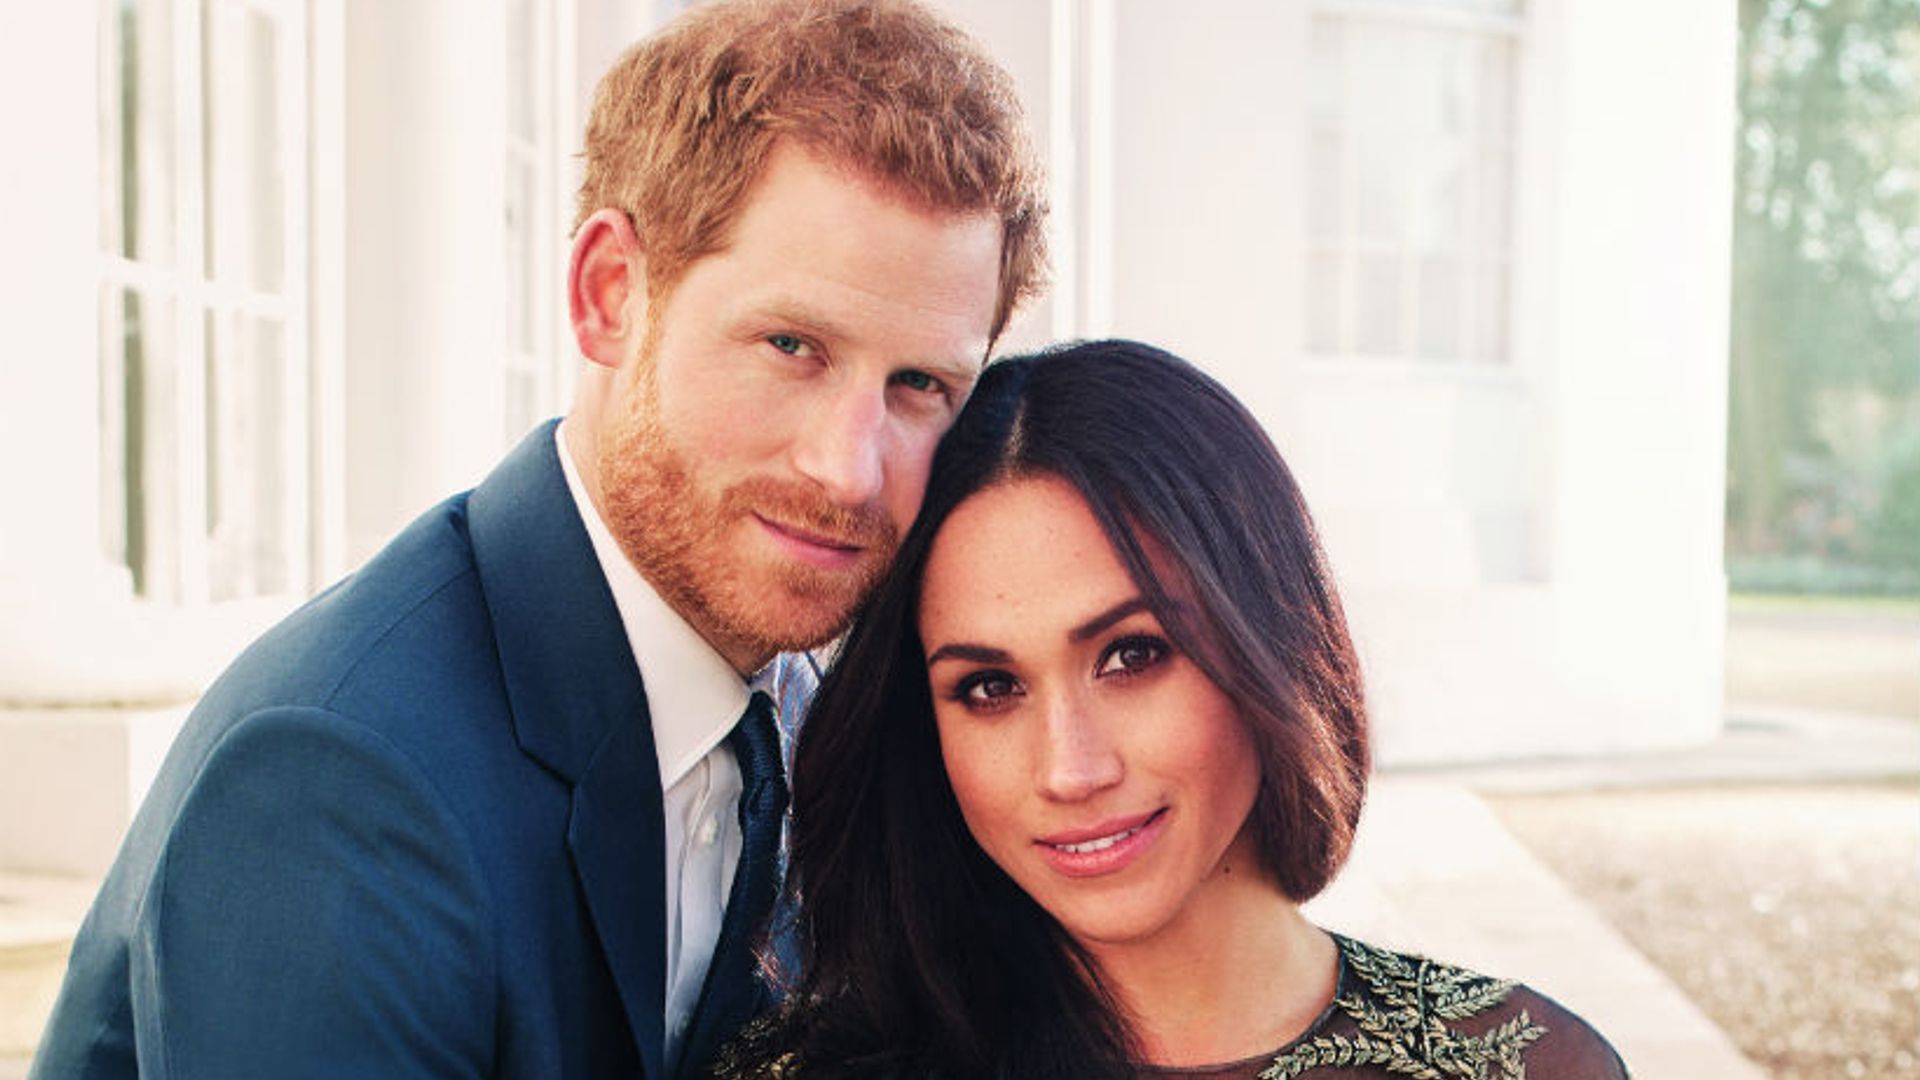 Prince Harry and Meghan Markle reveal plans for carriage procession on wedding day